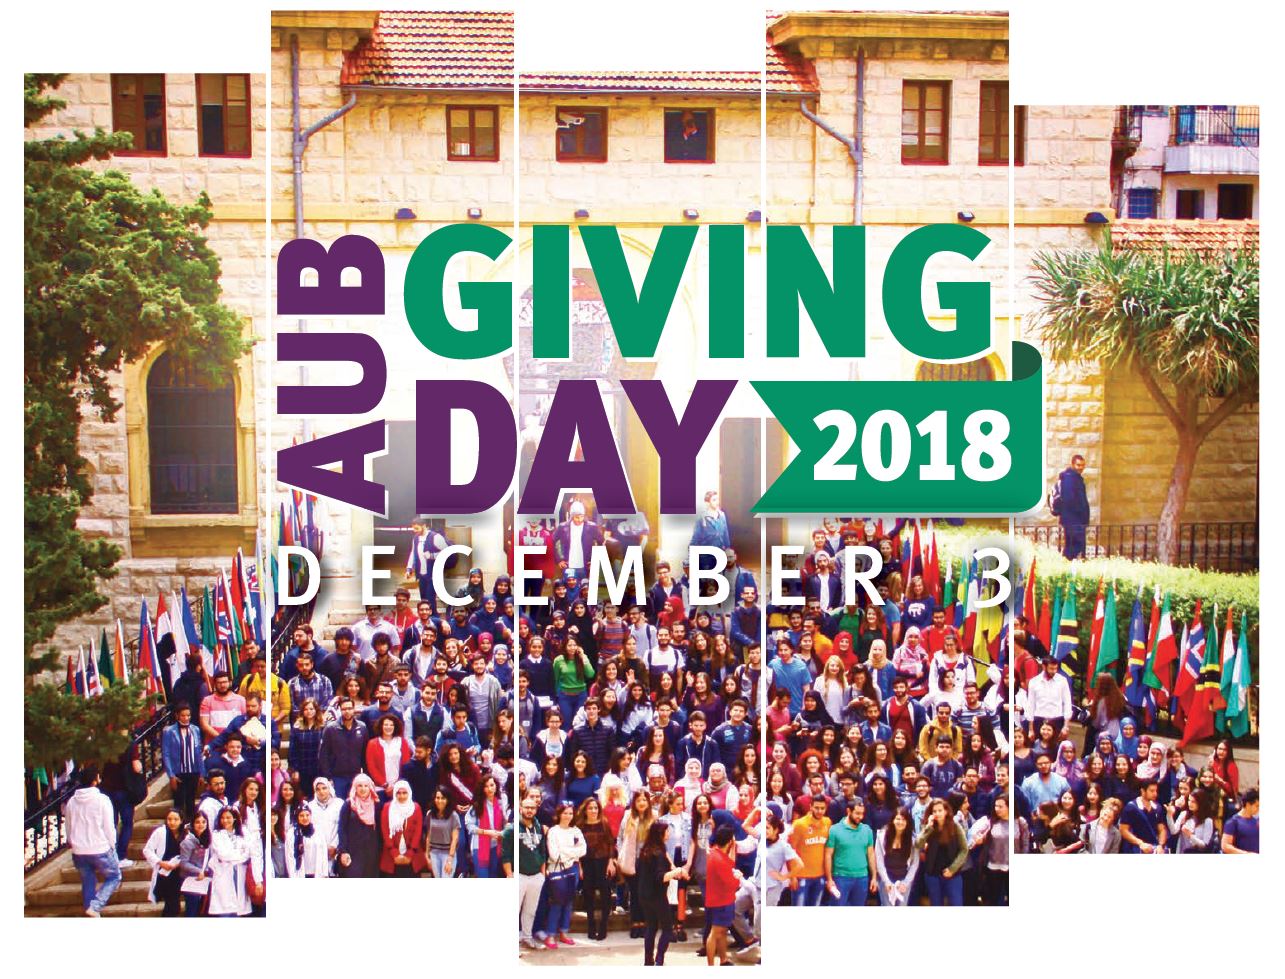 AUB Giving Day